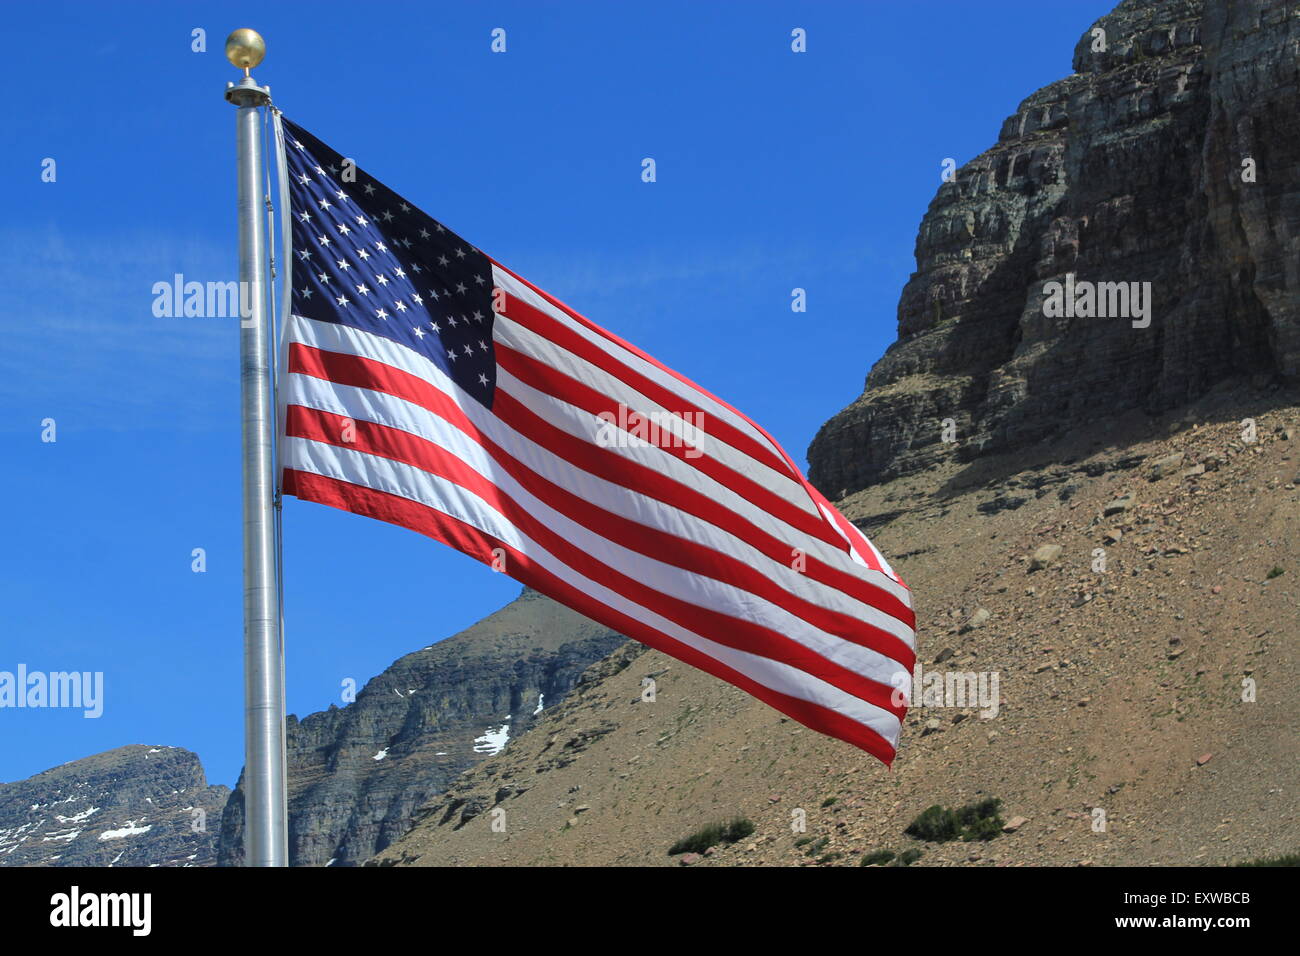 American flag, showing the full stars and stripes, on a silver flagpole blowing in the wind against a blue sky and mountains Stock Photo